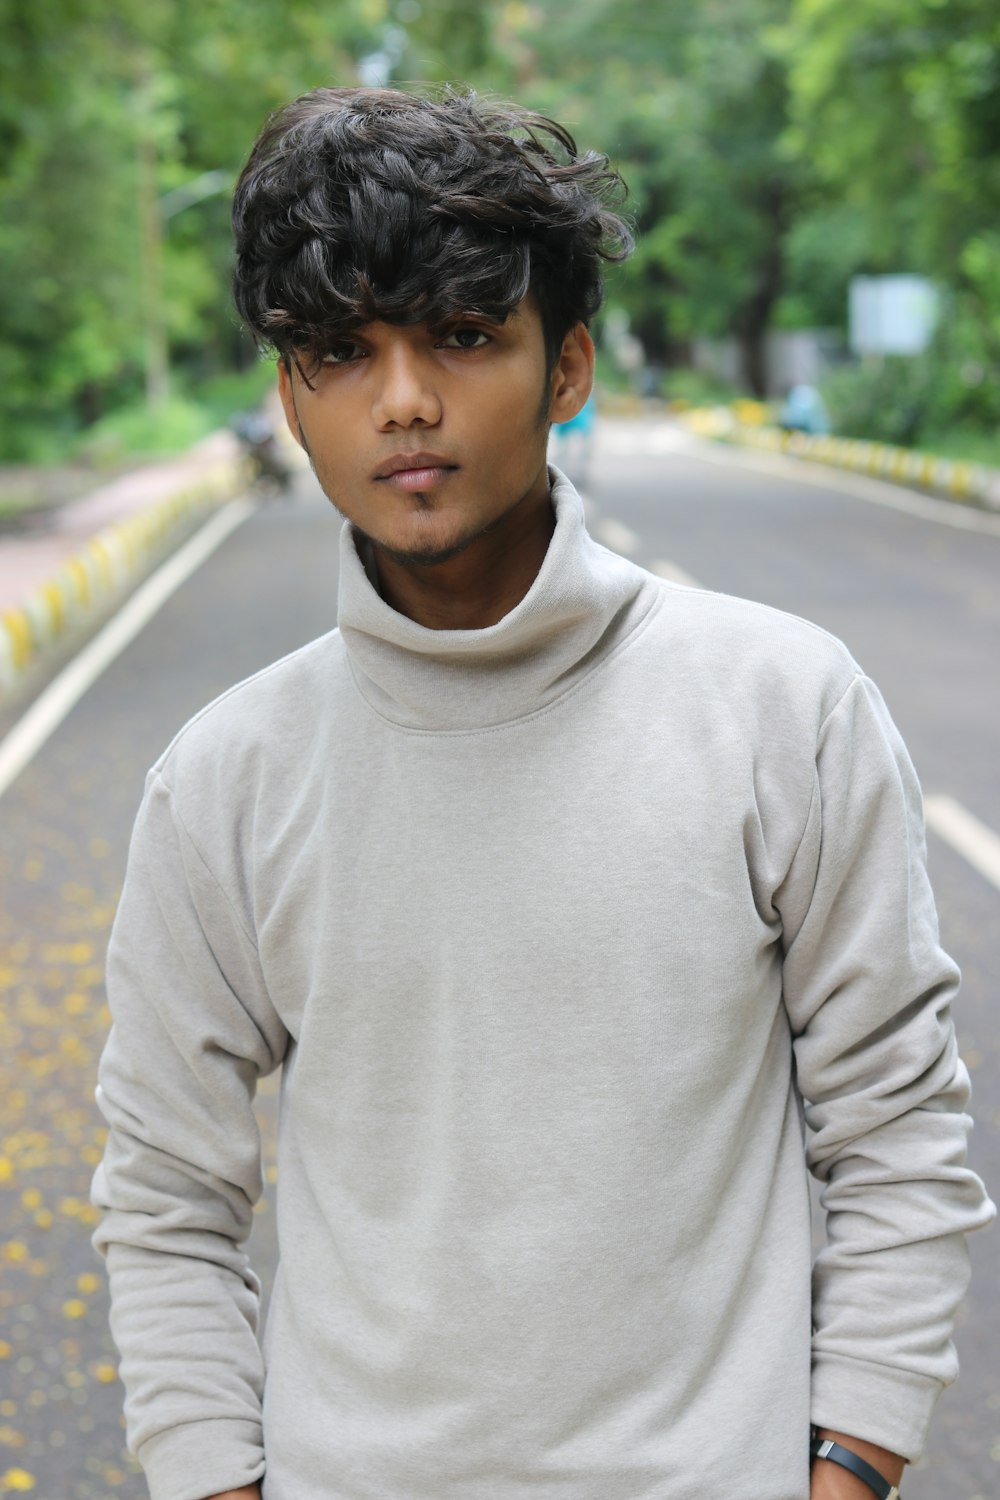 man in white turtleneck sweater standing on road during daytime